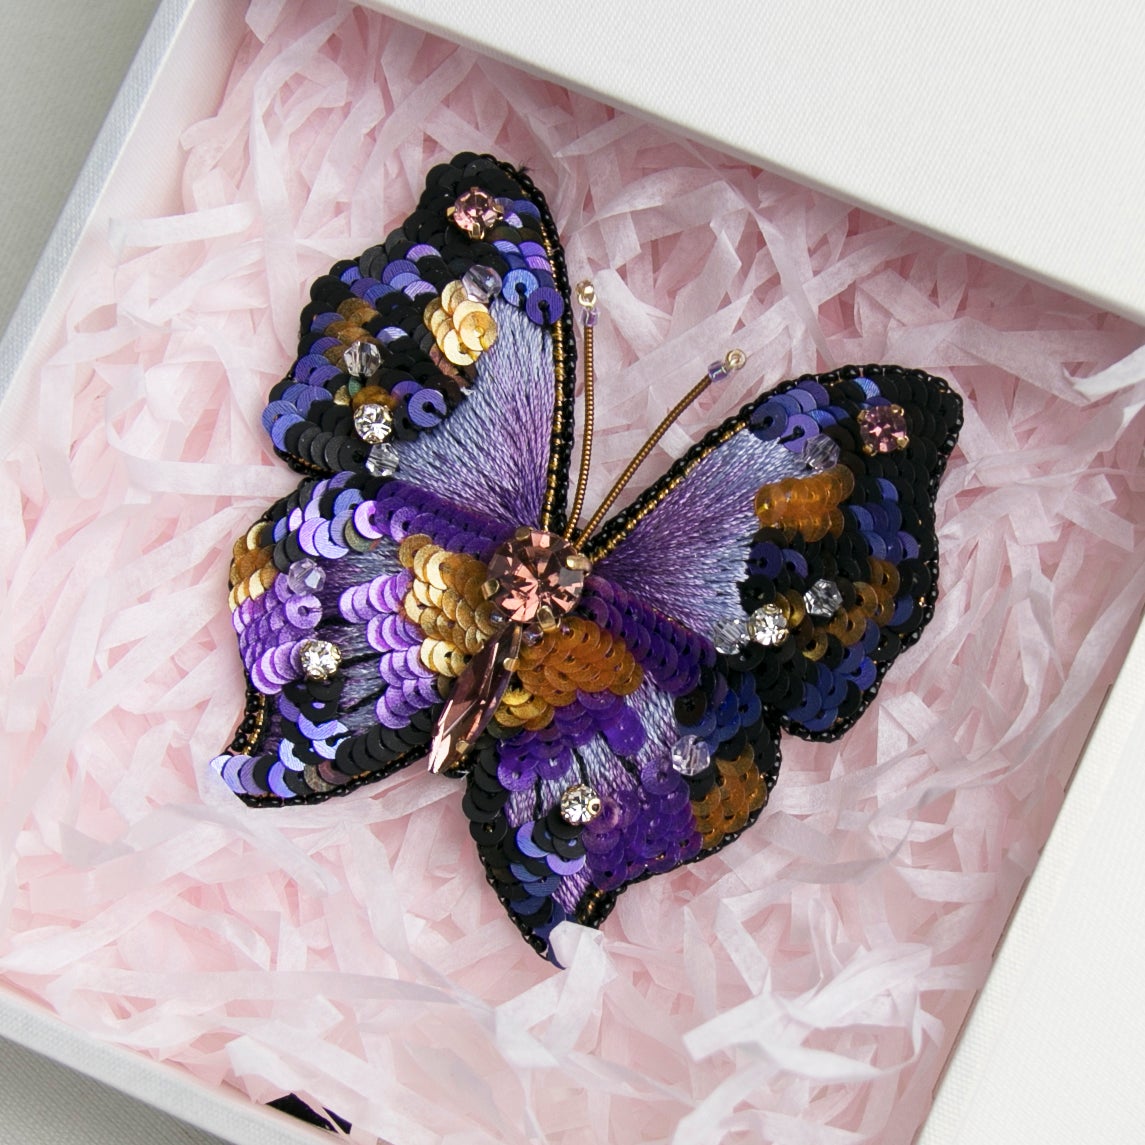 Sewing Needles Embroidery Brooch Craft Kits-Purple Butterfly